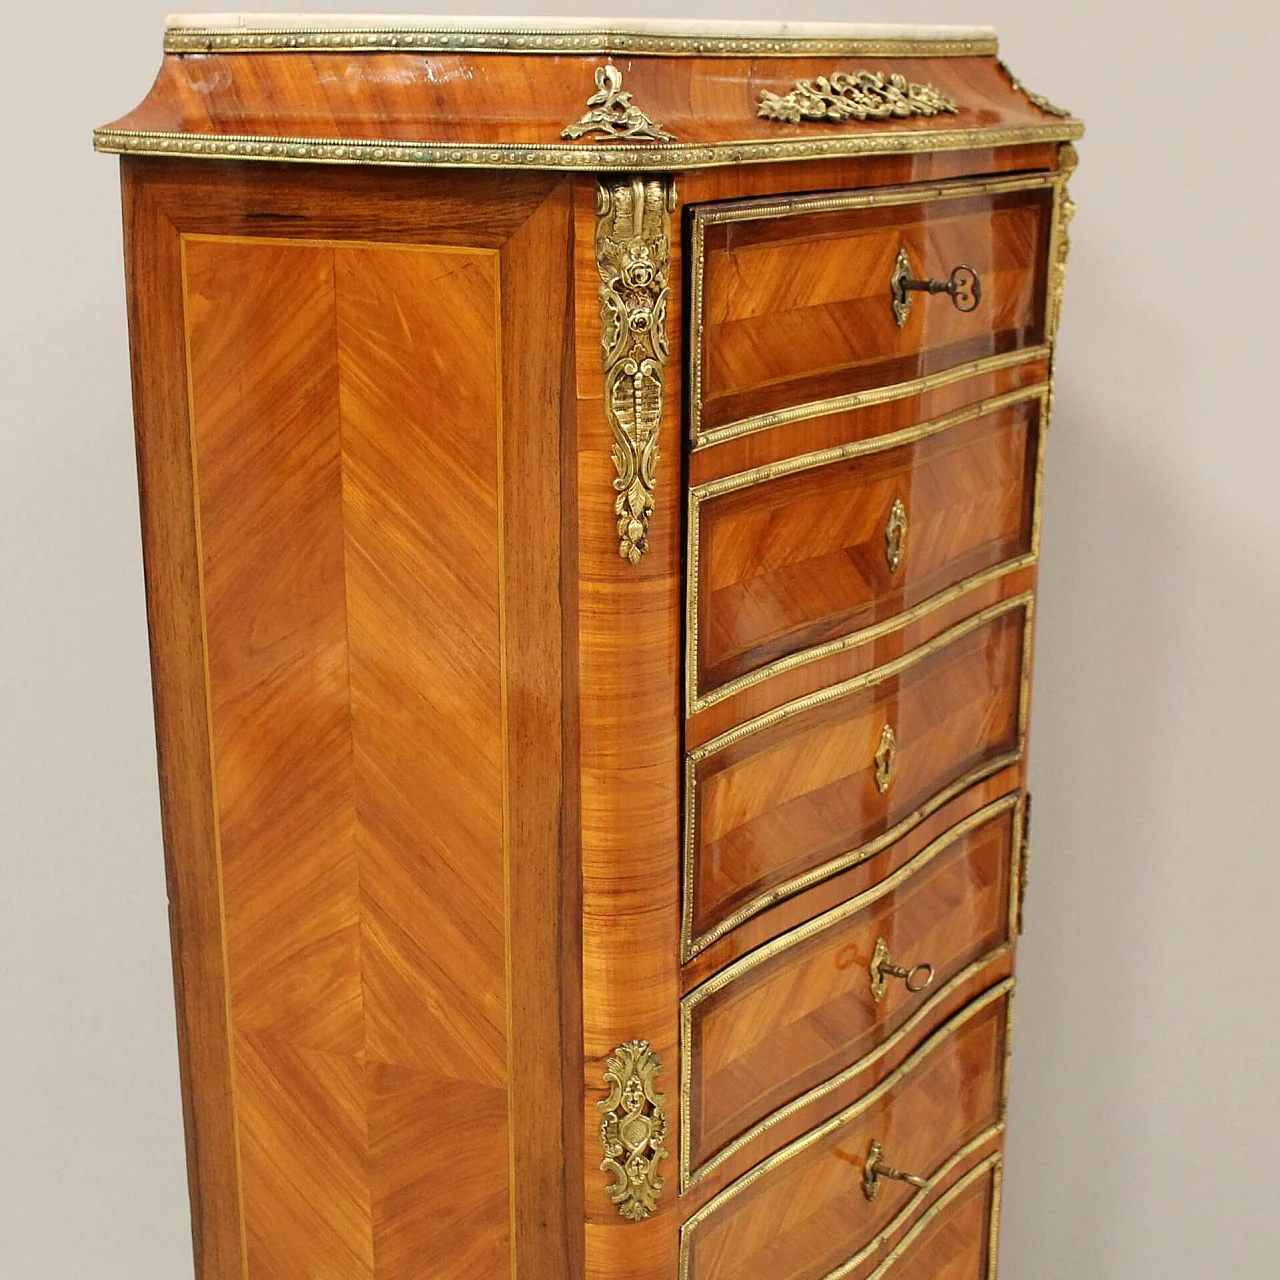 Napoleon III secretaire in bois de rose, rosewood inlay and gilded bronze with marble top, 19th century 6